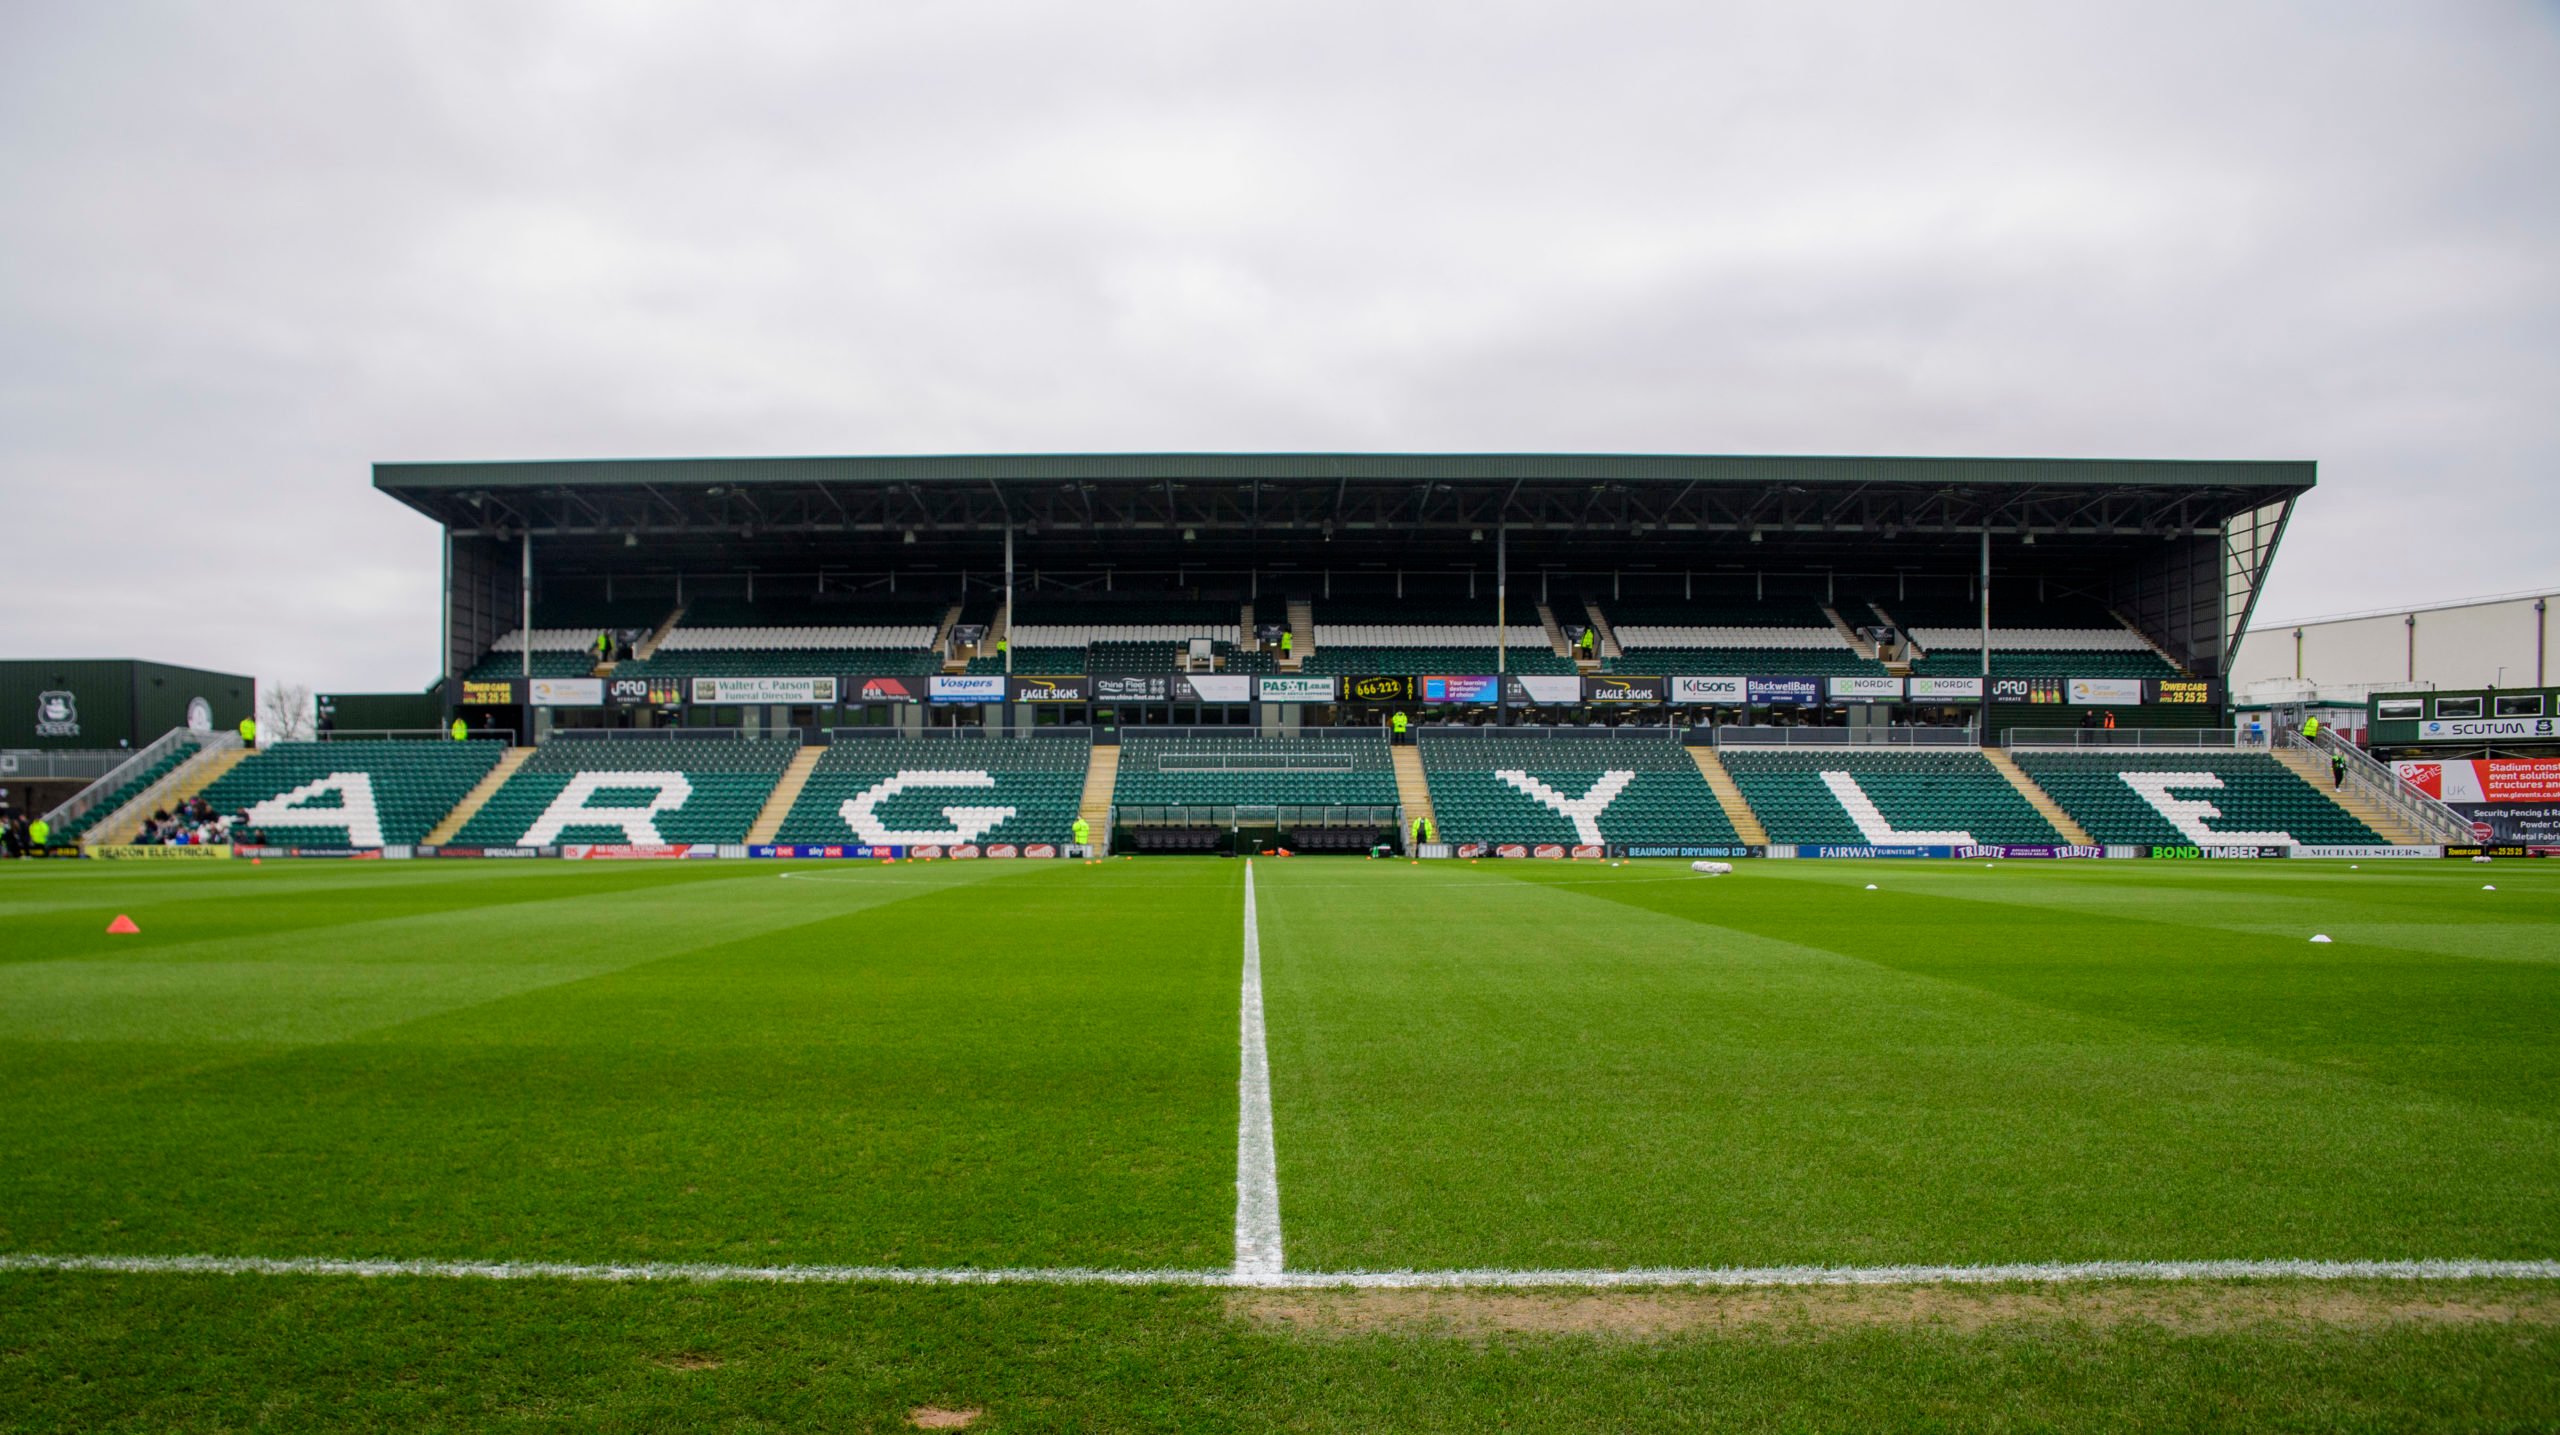 Report: Chelsea sign young Plymouth player ahead of FA Cup tie on Saturday